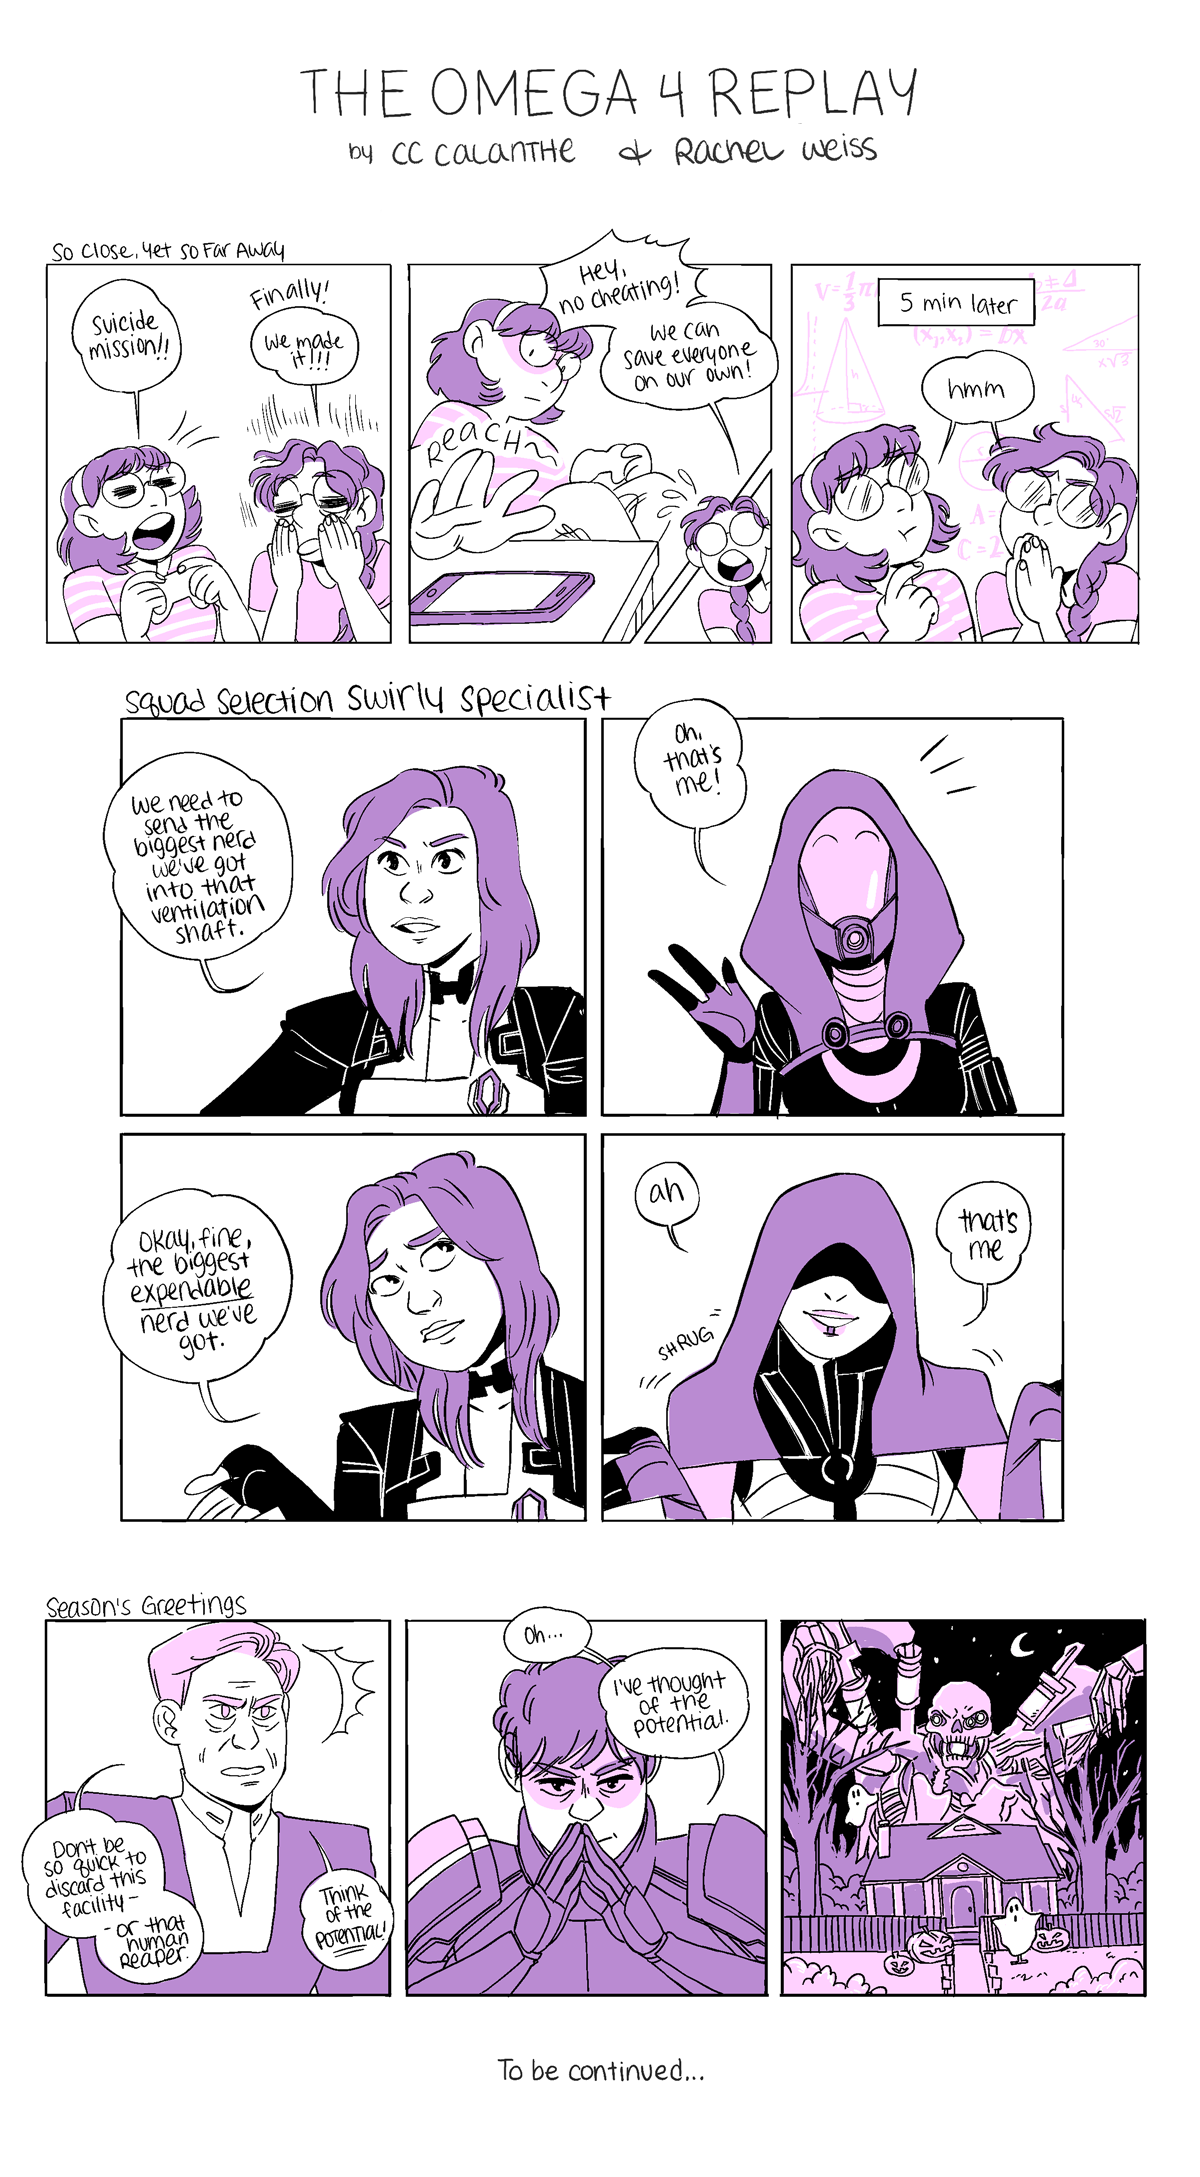 THE OMEGA 4 REPLAY by CC Calanthe & Rachel Weiss

Comic 1: So Close, Yet So Far Away
Panel 1:
CC: Suicide mission!!
Rachel: Finally! We made it!!!
Panel 2: CC reaches for her phone.
Rachel, interrupting: Hey, no cheating! We can save everyone on our own!
Panel 3: 5 min later
Both CC and Rachel are thinking, math swirling around them.

Comic 2:
Miranda: We need to send the biggest nerd we've got into that ventilation shaft.
Tali, excitedly: Oh, that's me!
Miranda: Okay, fine, the biggest EXPENDABLE nerd we've got.
Kasumi, shrugging: Ah, that's me.

Comic 3: Season's Greetings
The Illusive Man: Don't be so quick to discard this facility - or that human reaper. Think of the POTENTIAL!
Shepard, fingers together: Oh... I've thought of the potential.
A house decorated for Halloween, with the human reaper being spooky and hovering over it.